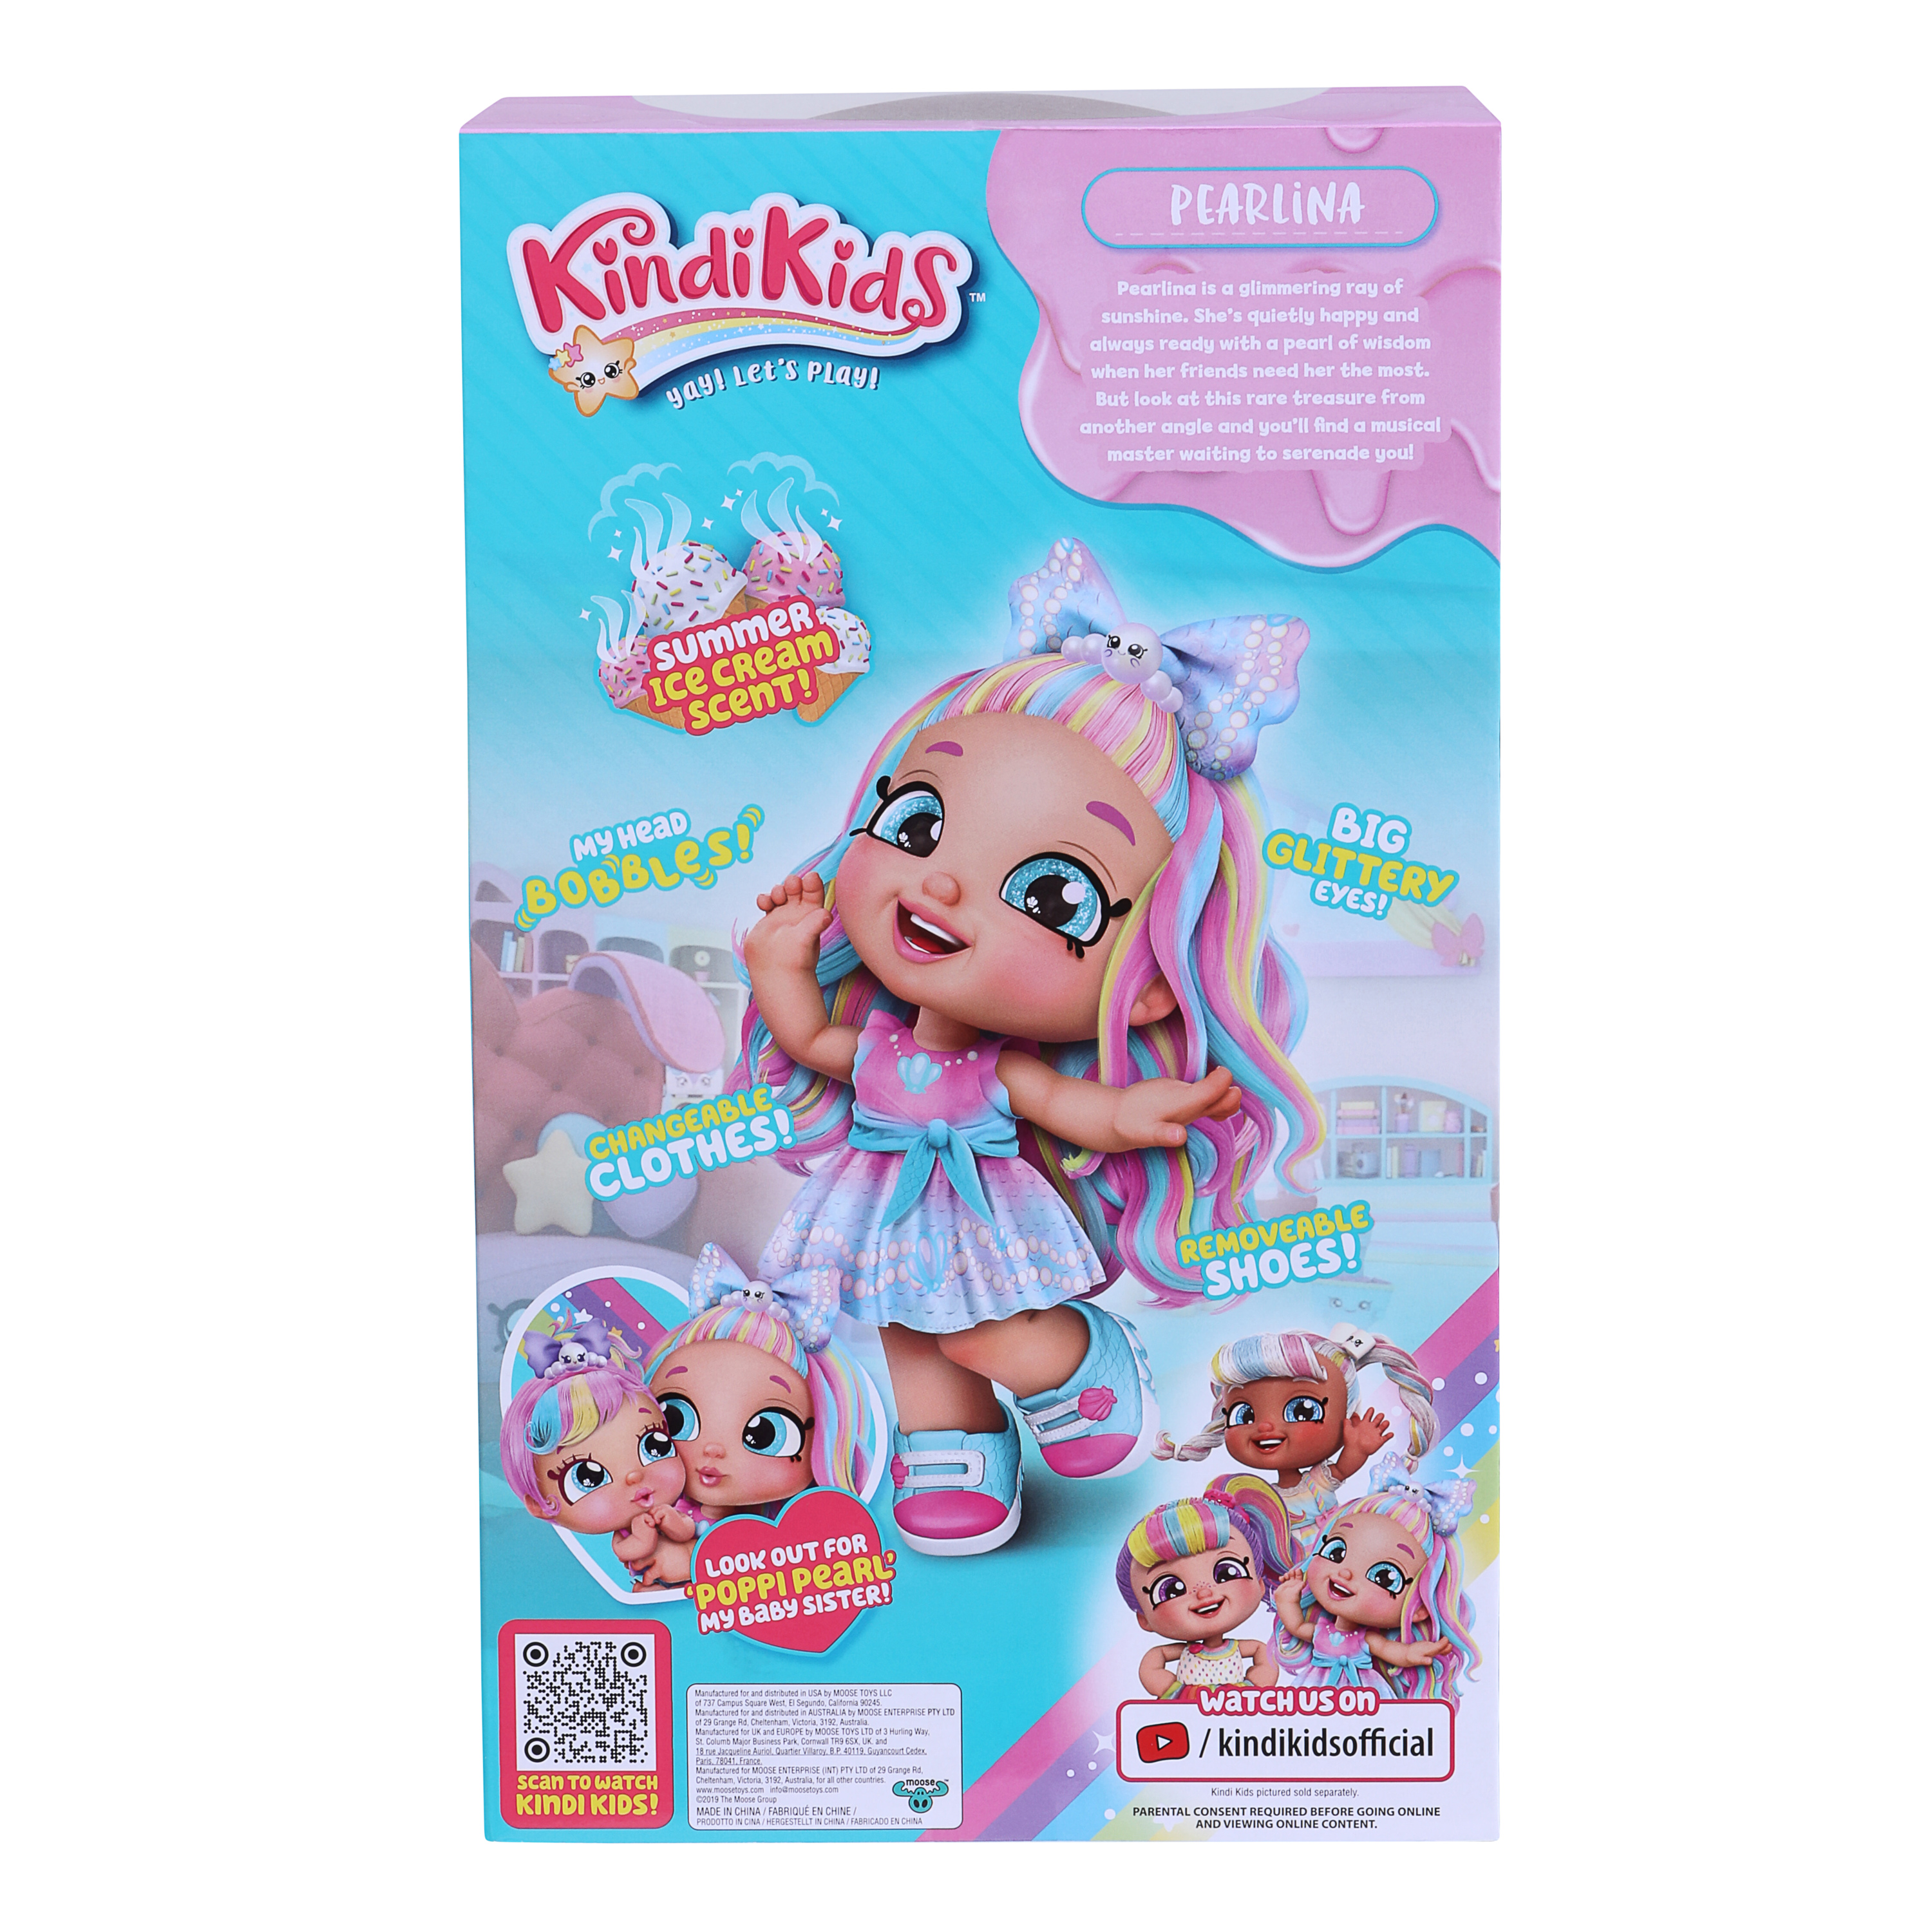 Kindi Kids, Scented Sisters 10 " Play Doll Pearlina, Preschool, Girls, Ages 3+ - image 6 of 6